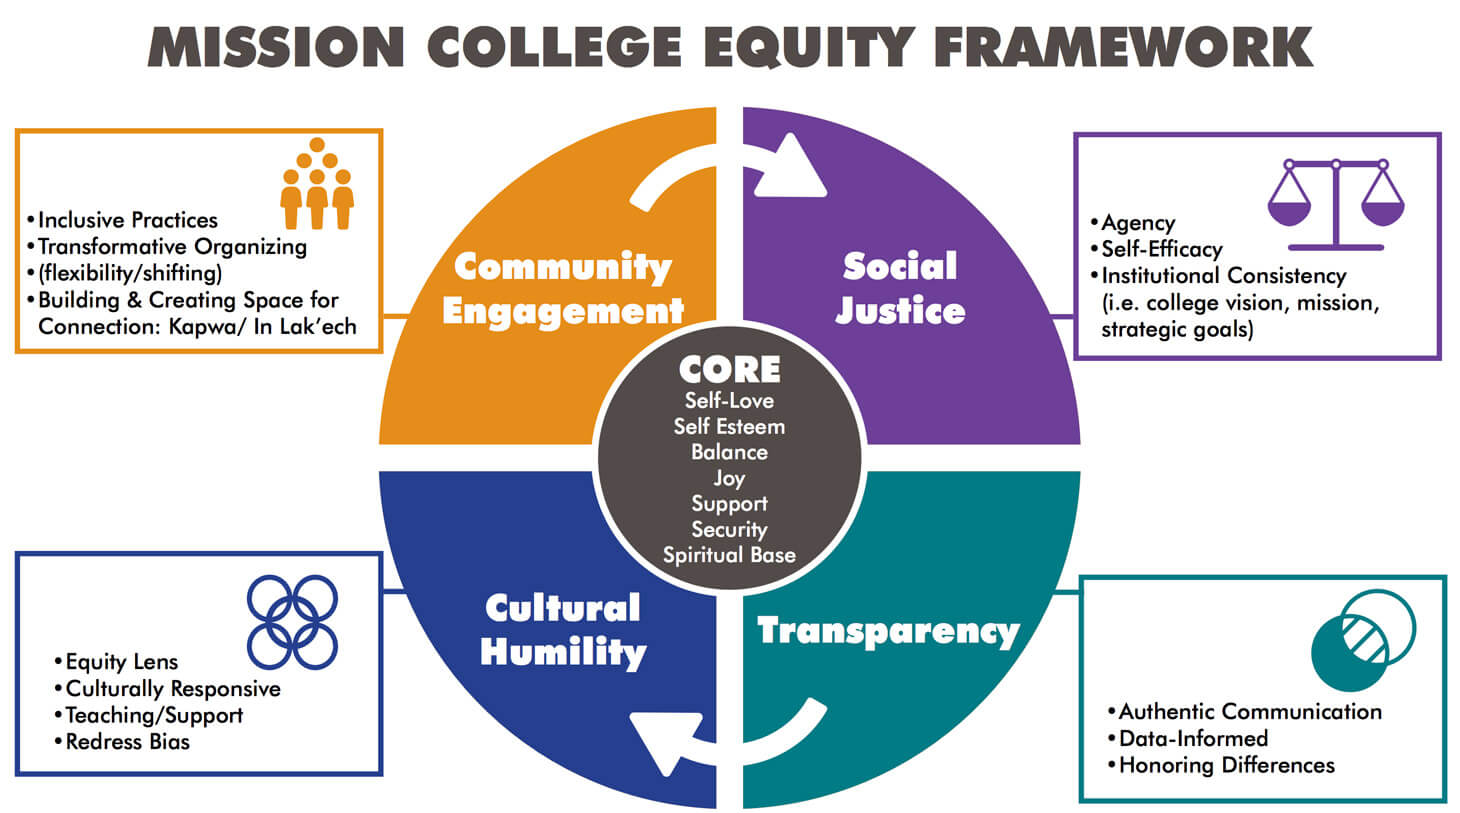 circle broken into quadrants for community engagement, social justice, cultural humility and transparency